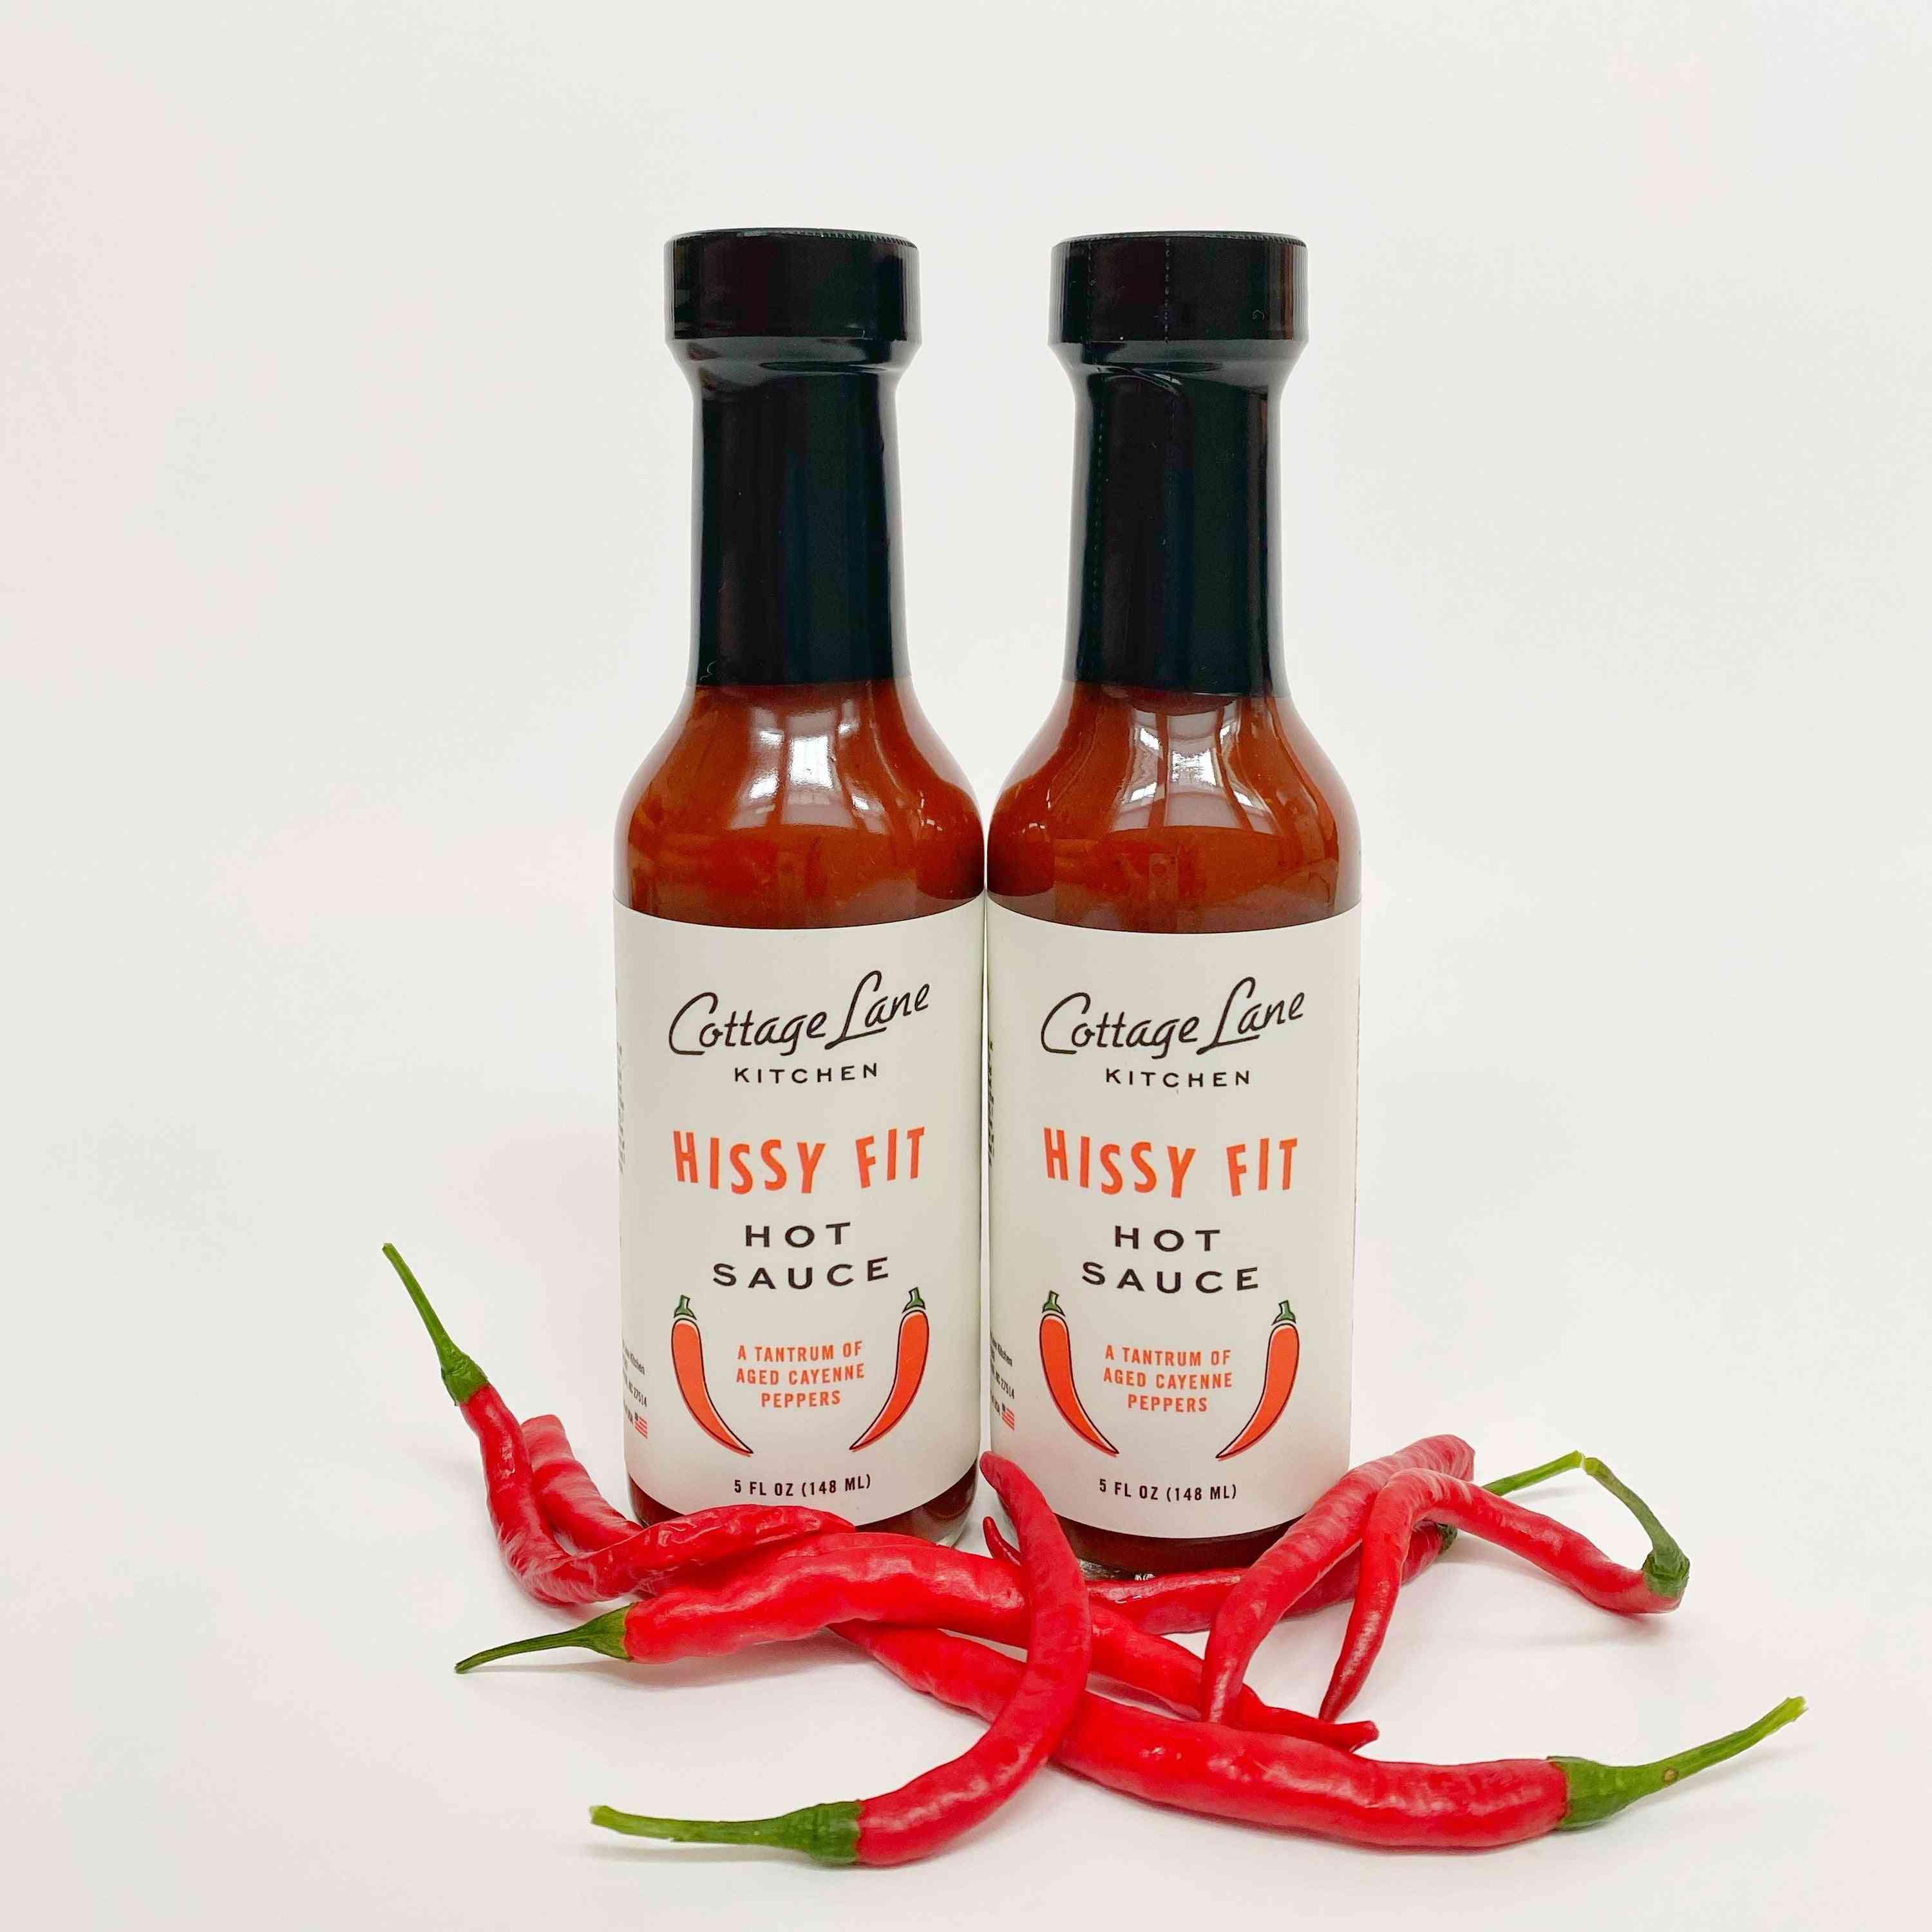 Hissy Fit Hot Sauce